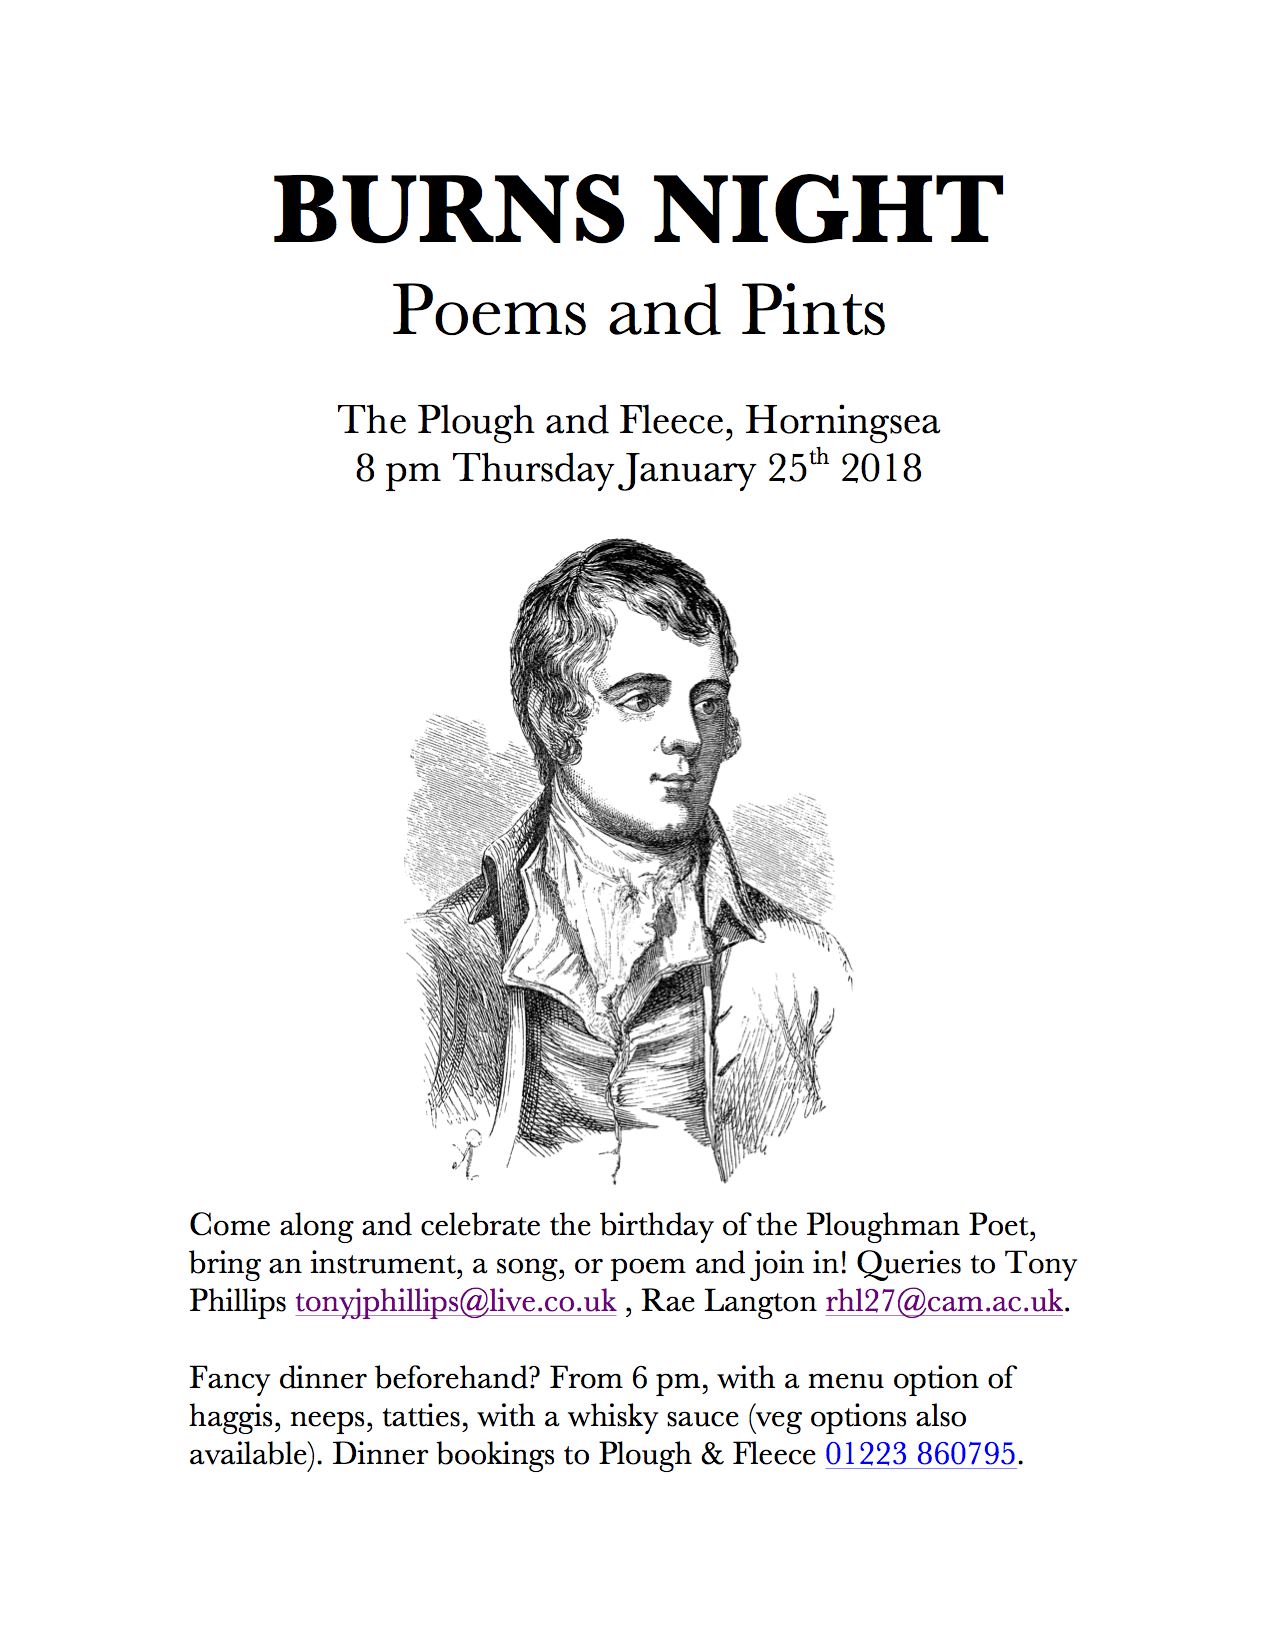 BURNS NIGHT POEMS AND PINTS FLYER